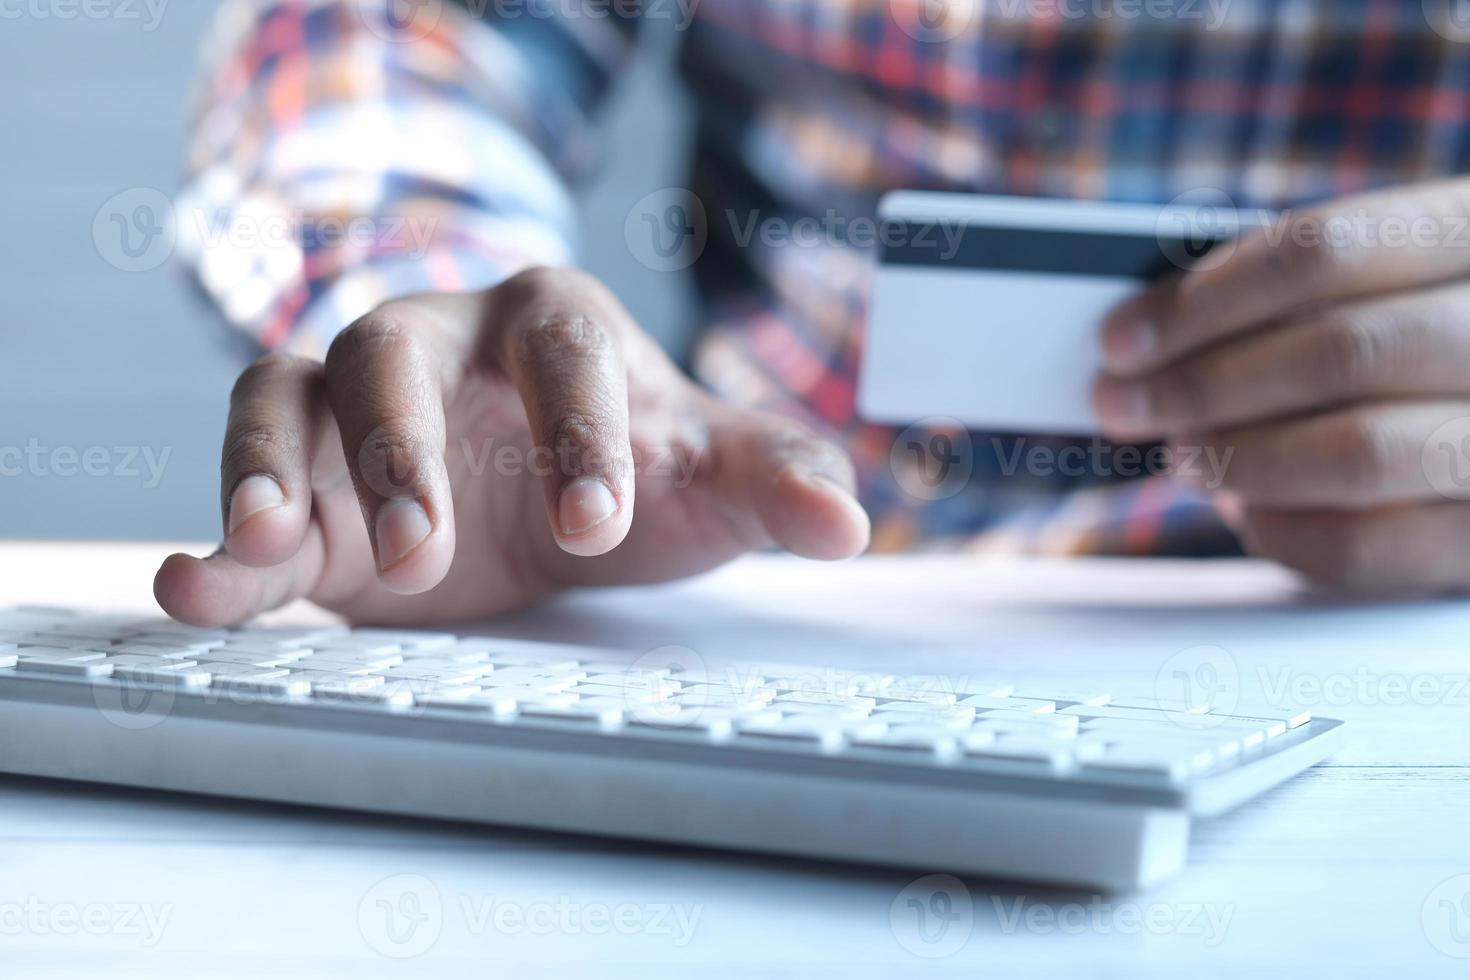 Man's hand holding a credit card and using laptop for shopping online photo